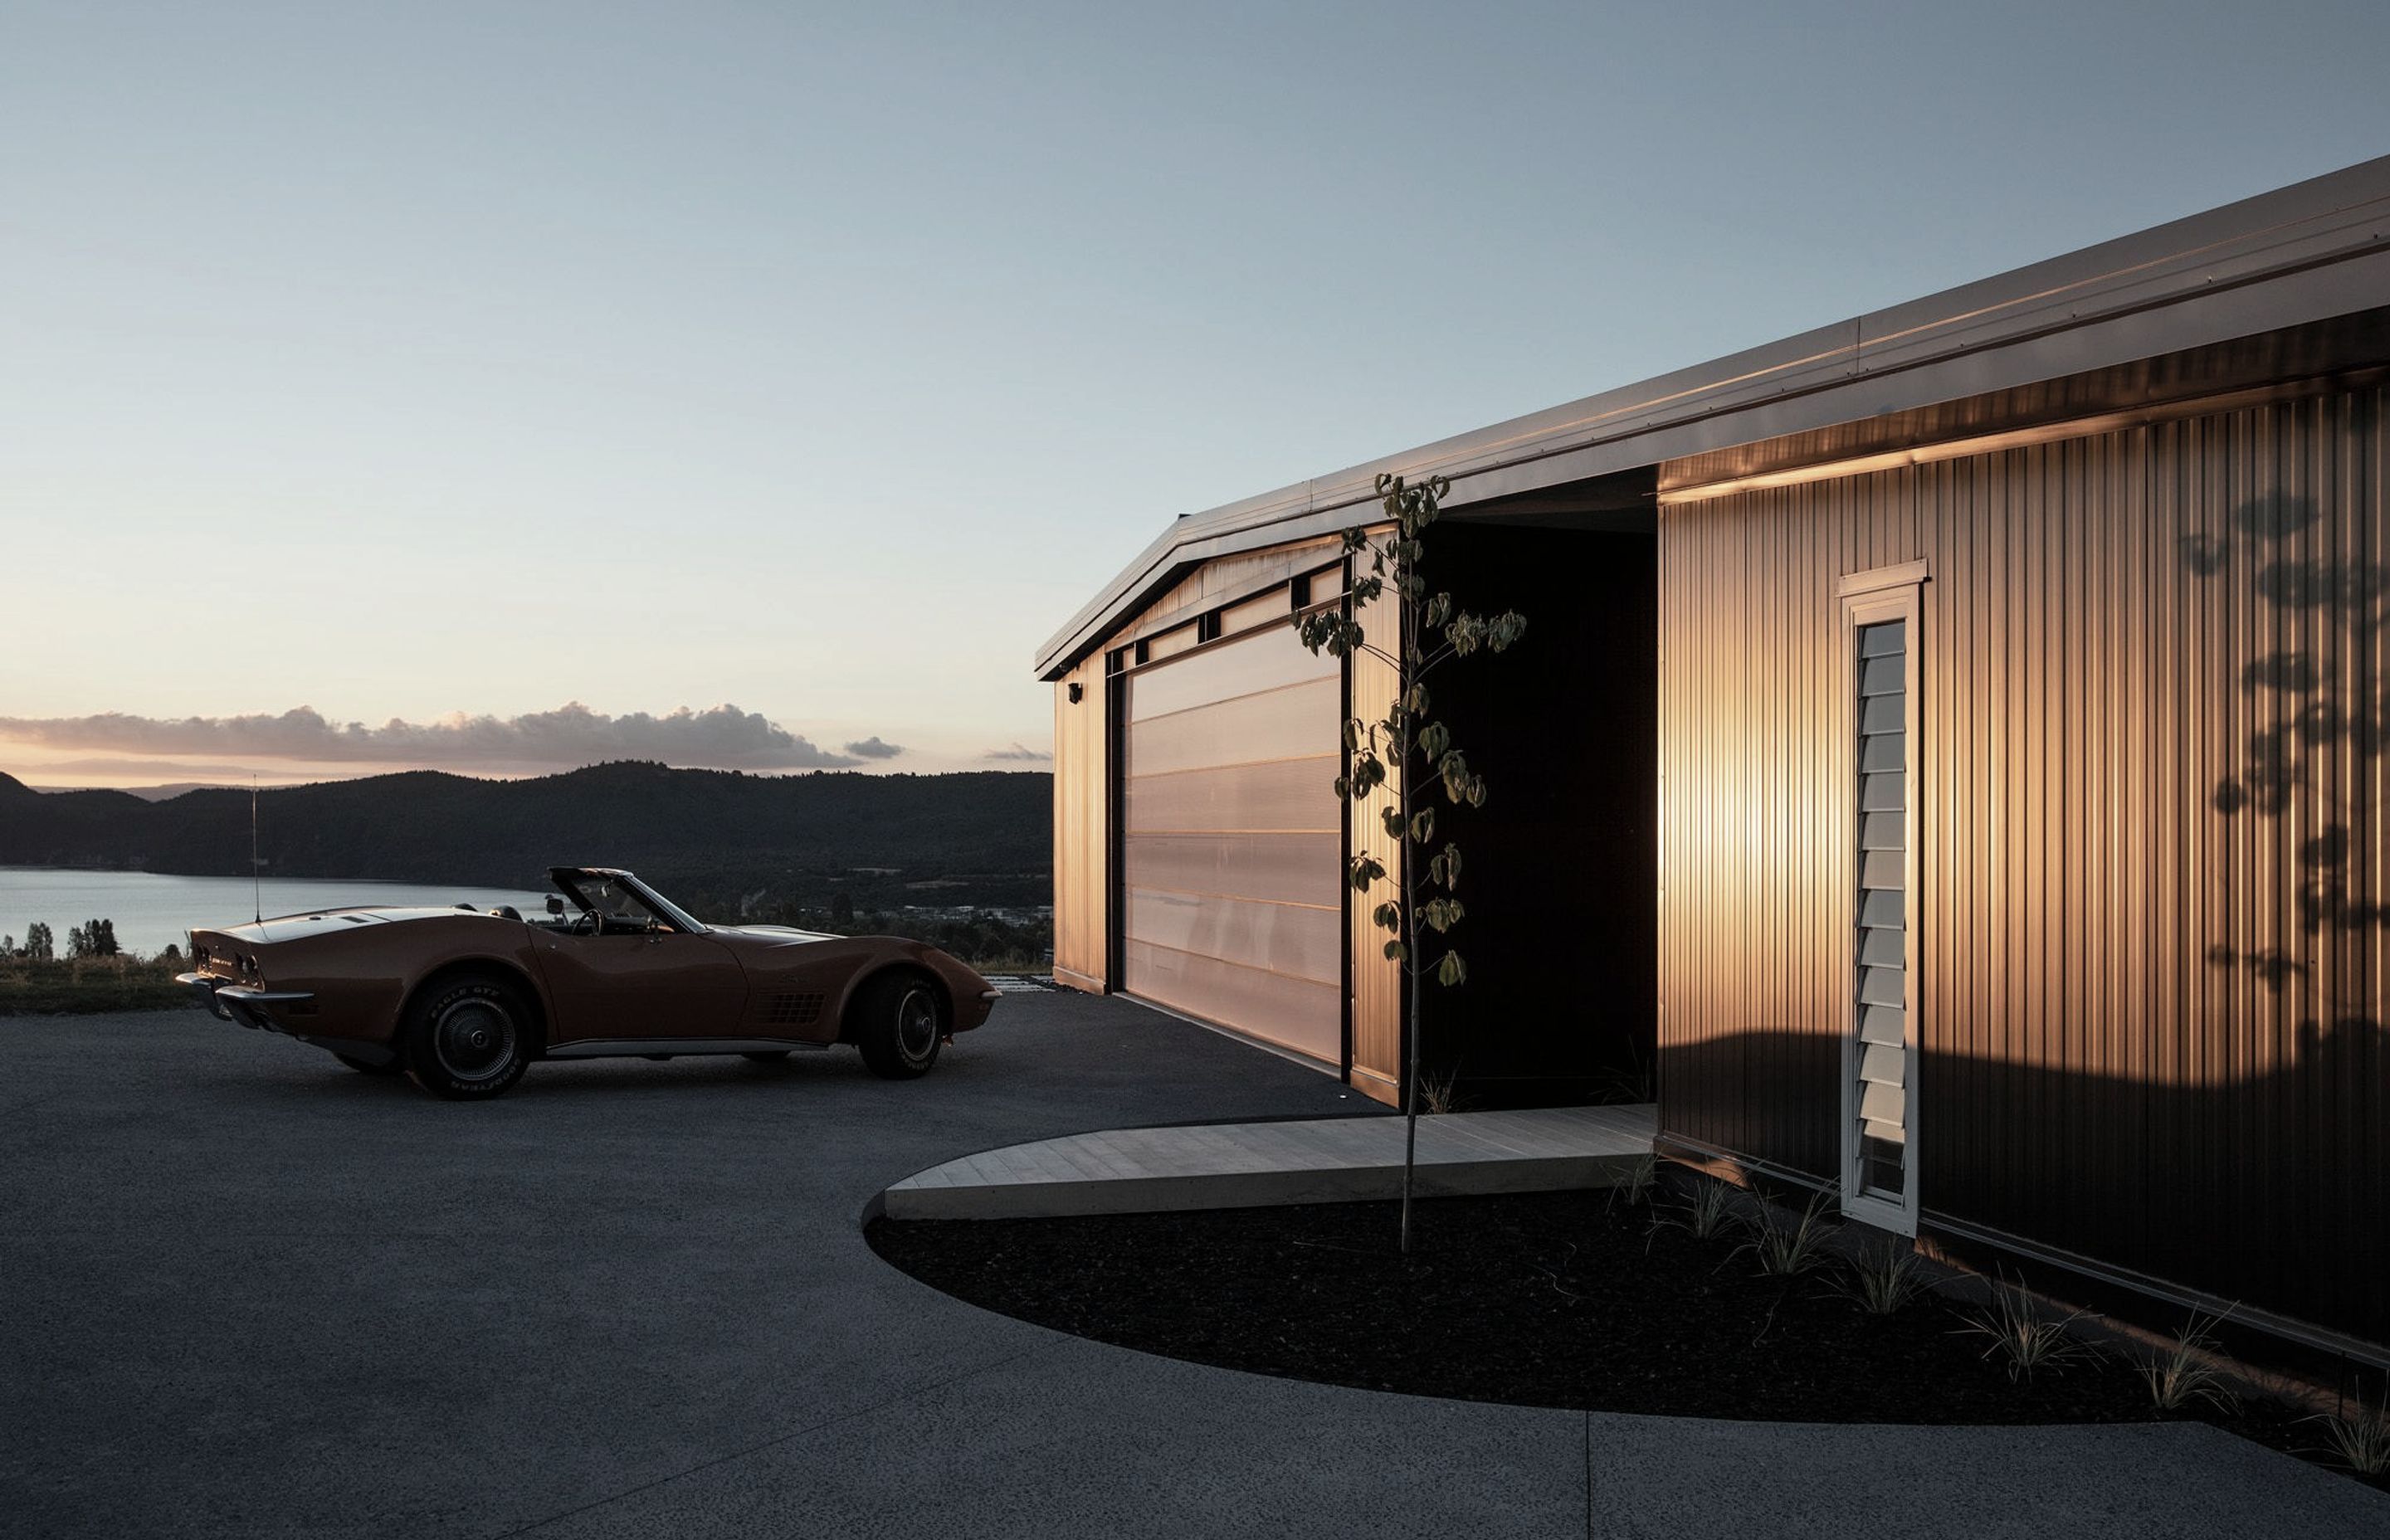 The owners' 1974 Corvette Stingray sits in front of the garage. Photograph: Simon Devitt.